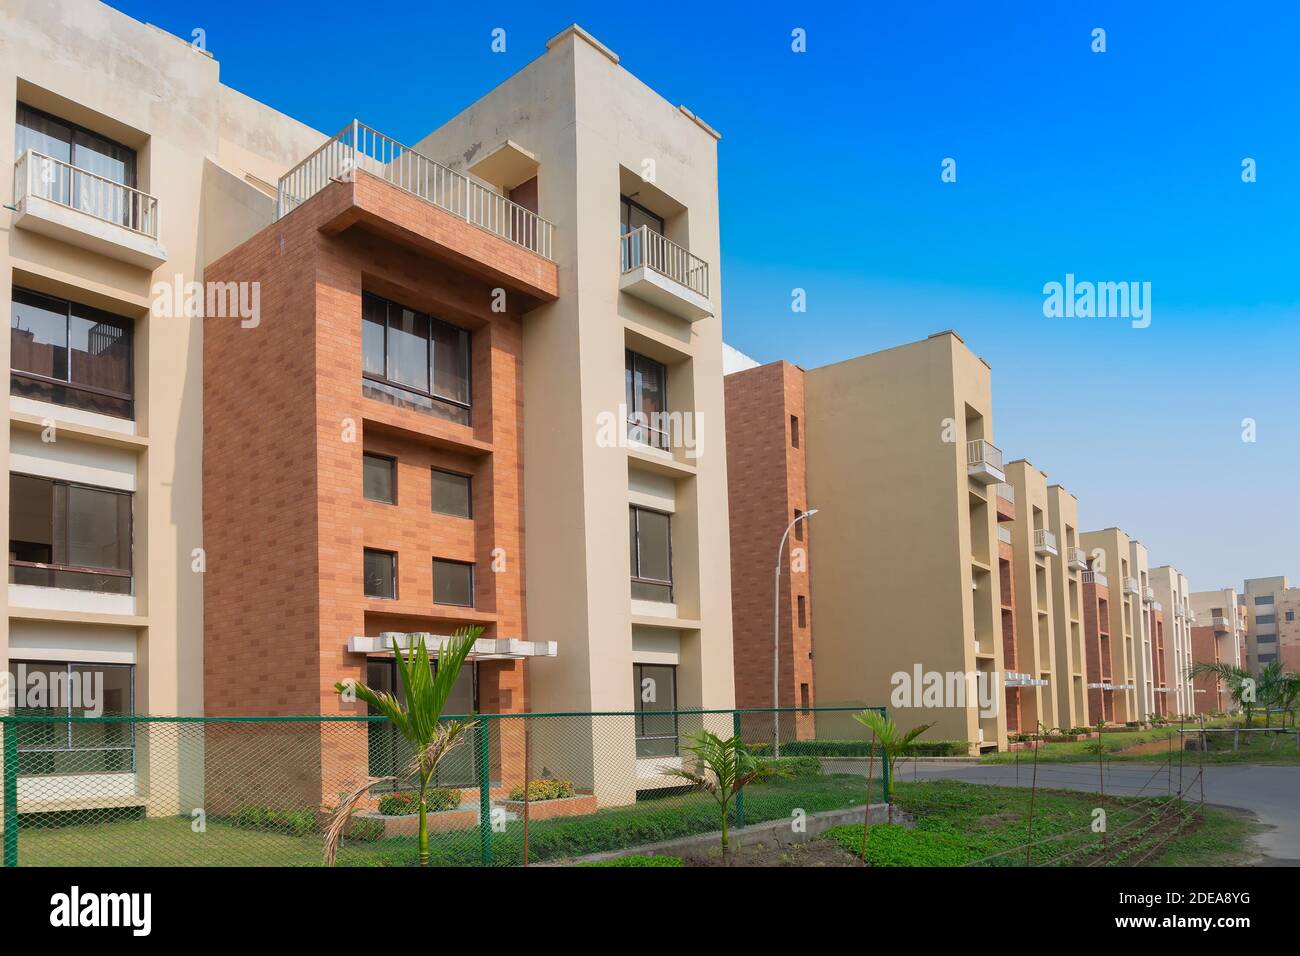 New residential building complex being built at Rajarhat New Town area of Kolkata, West Bengal, India. Kolkata is one of the fastest growing cities in Stock Photo